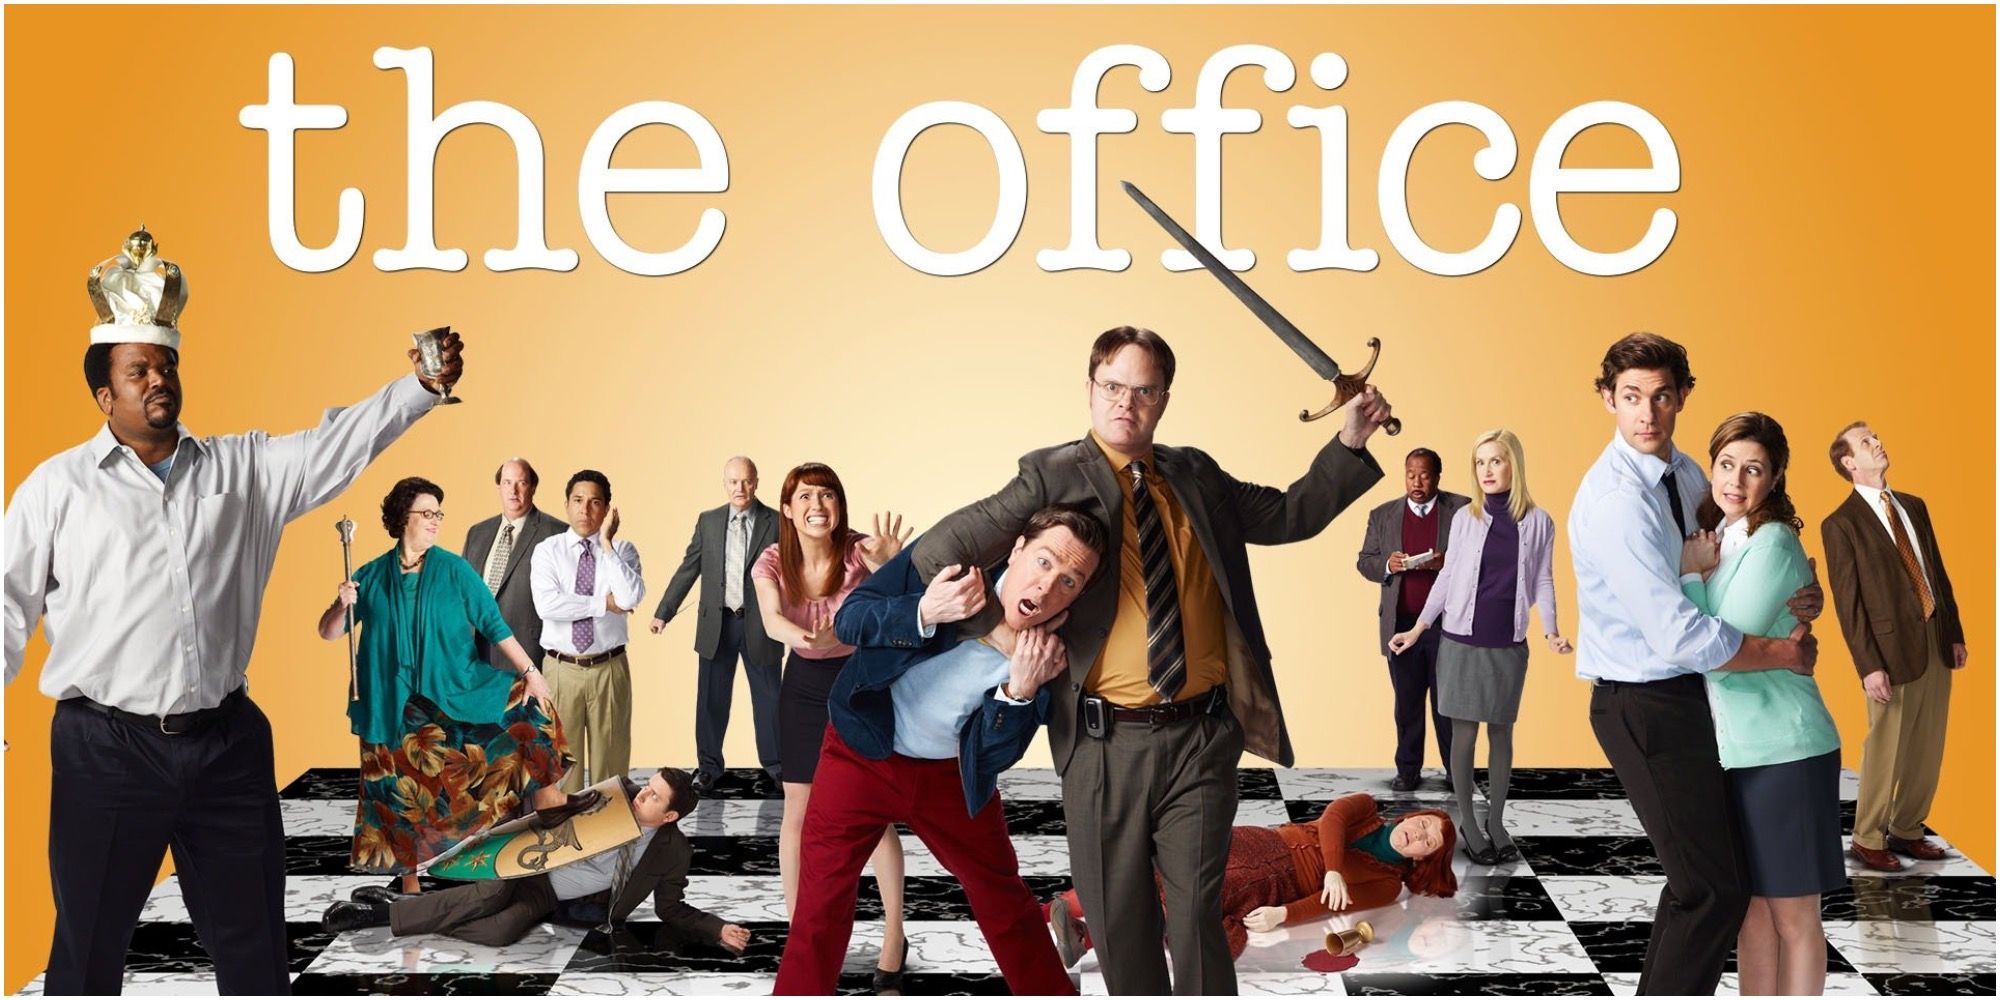 The Office Promo Poster Of The Cast Members